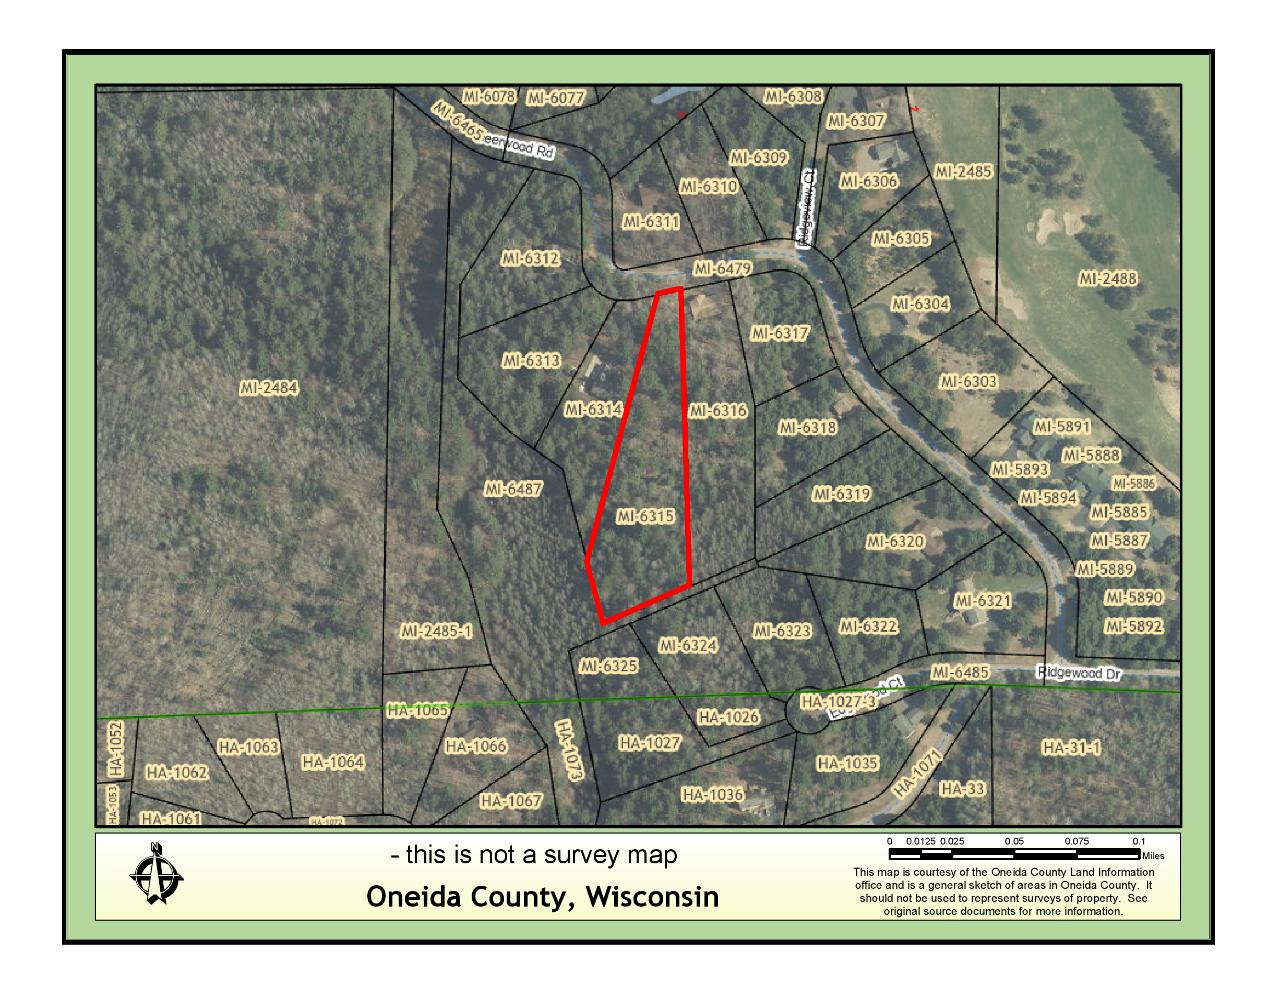 Beautiful heavily wooded lot in upscale Timber Ridge II Subdivision. Wildlife and golf right out your door. This is also a perfect area for biking/hiking with access to the Bearskin Bike/Hike trail. A great place to live, minutes to Minocqua.